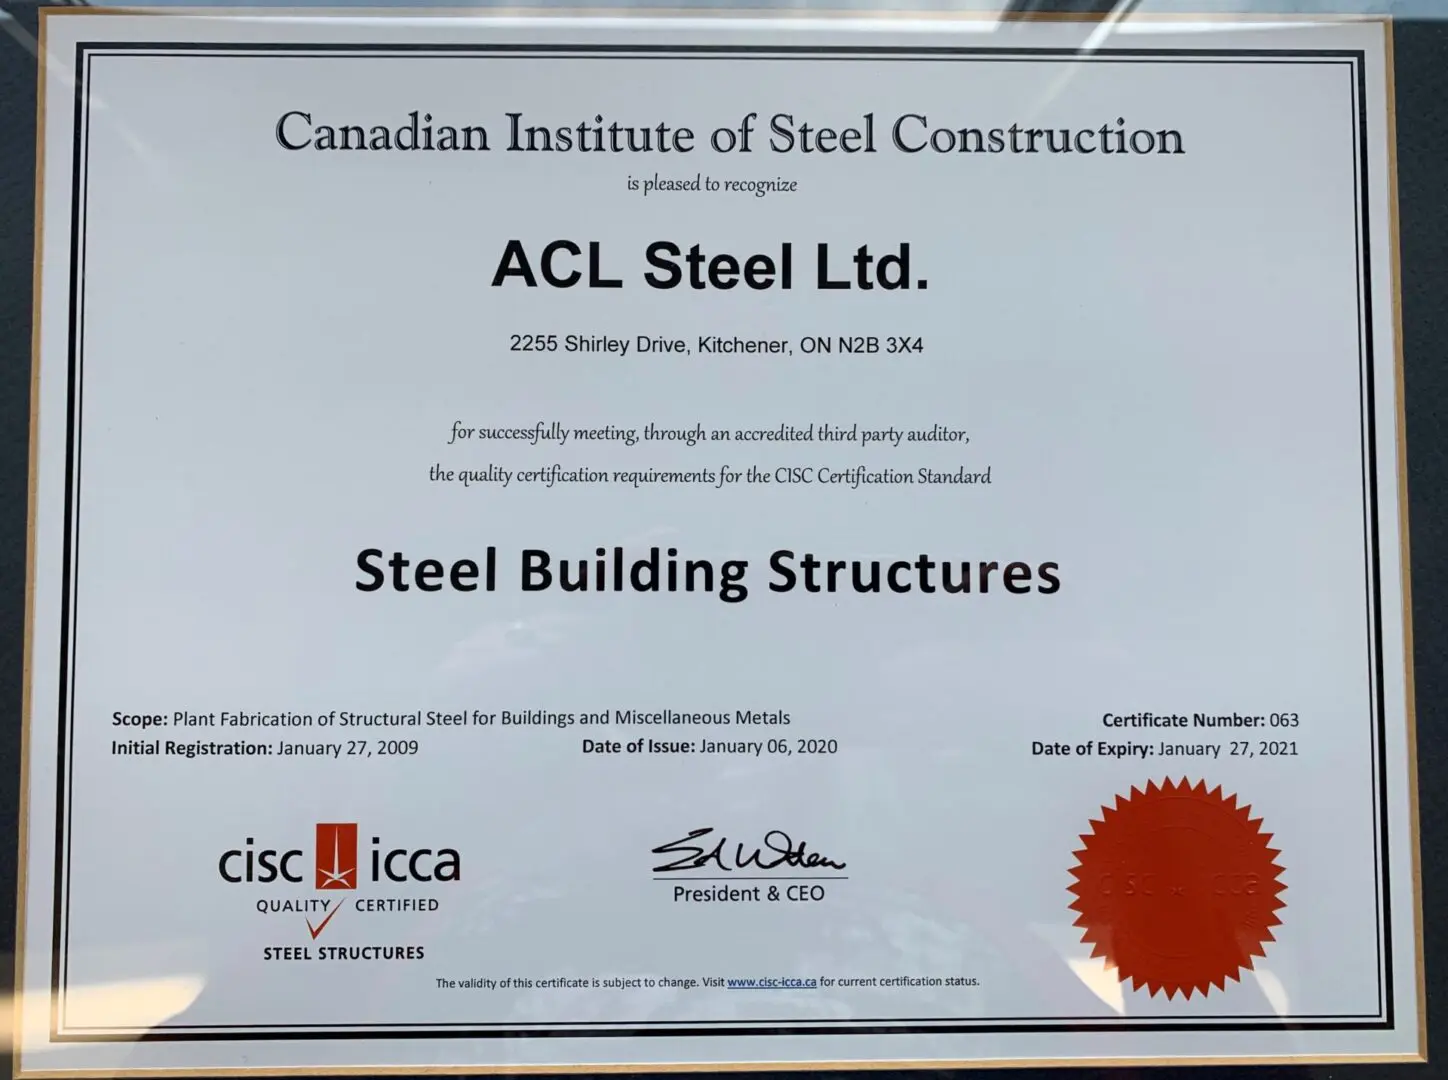 certificate of recognition by the Canadian institute of steel construction